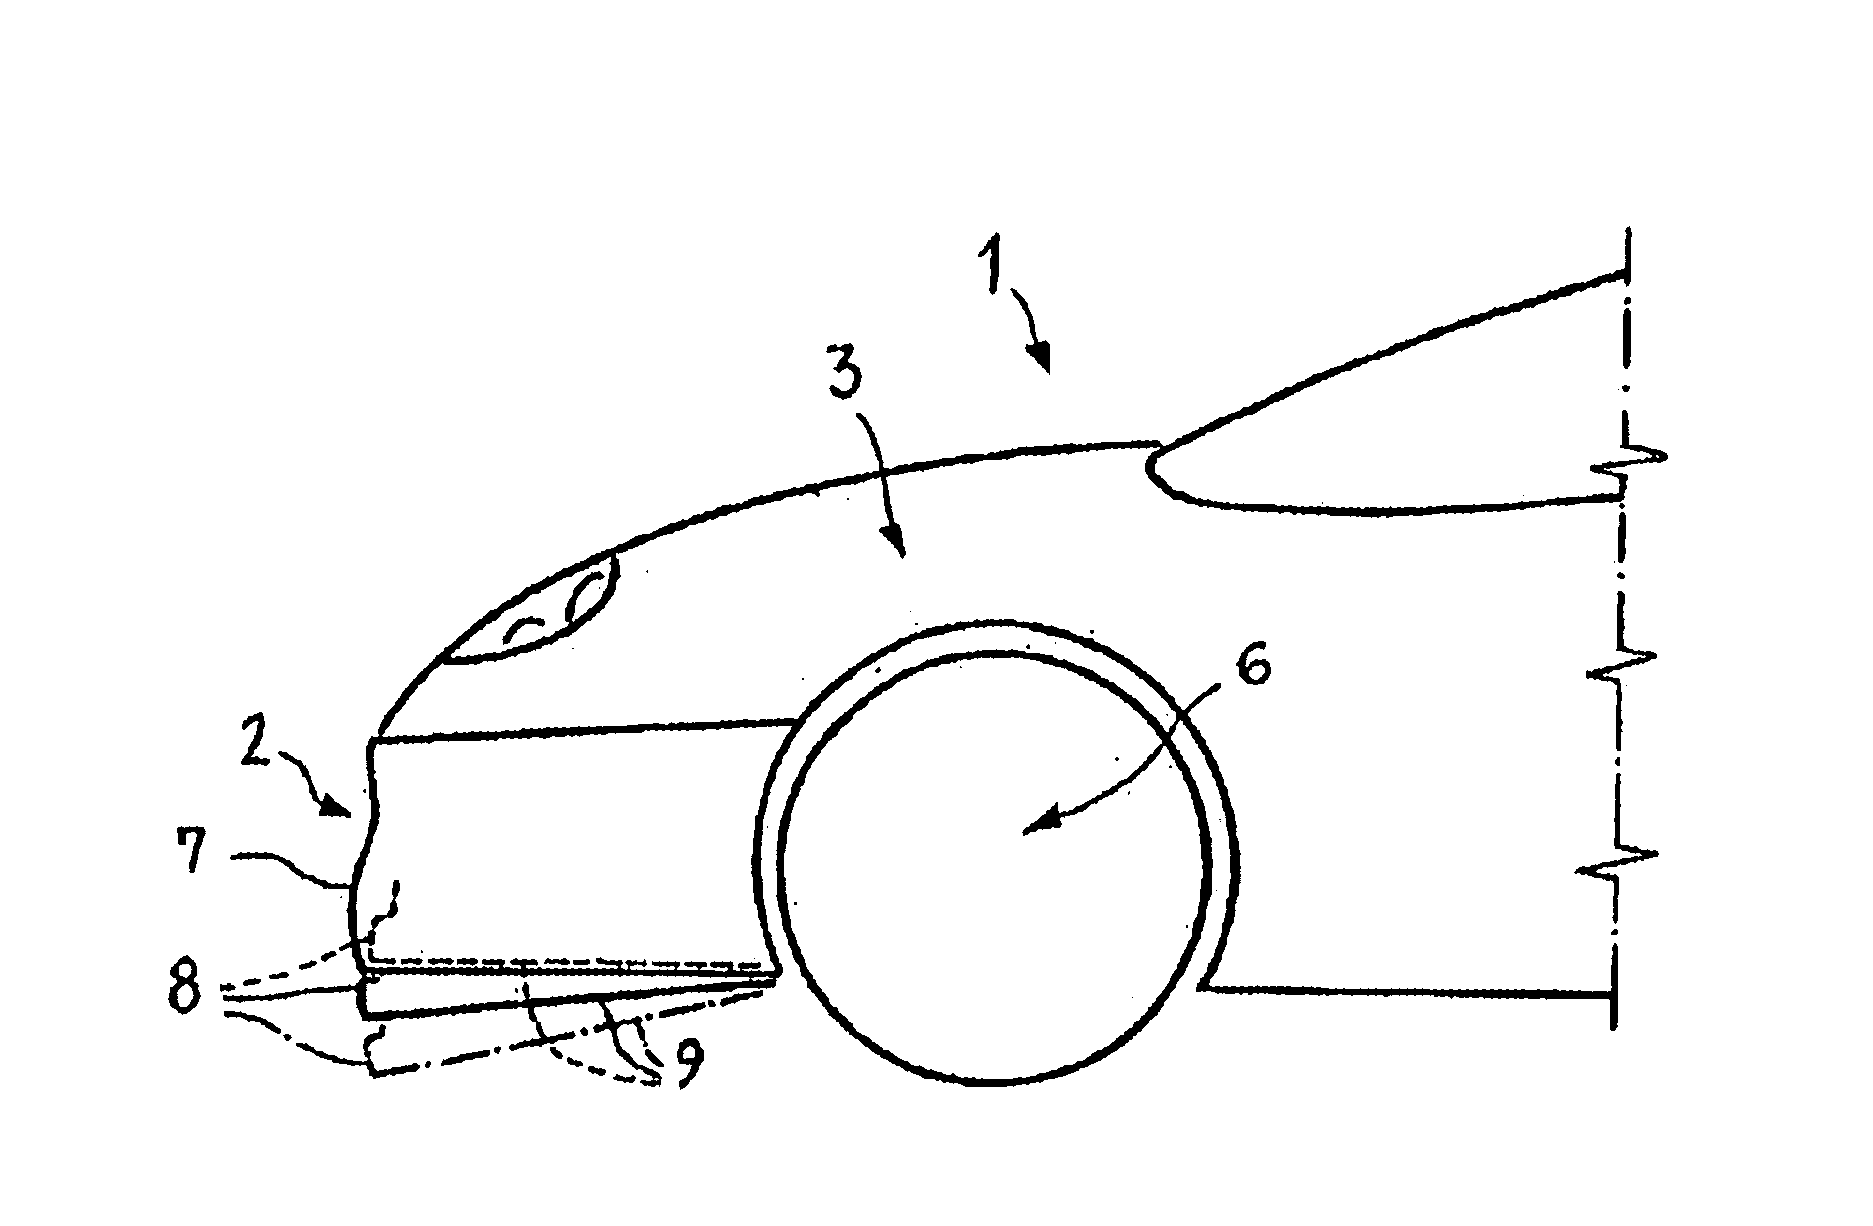 Vehicle bumper including a spoiler hinged between three positions of stable equilibrium